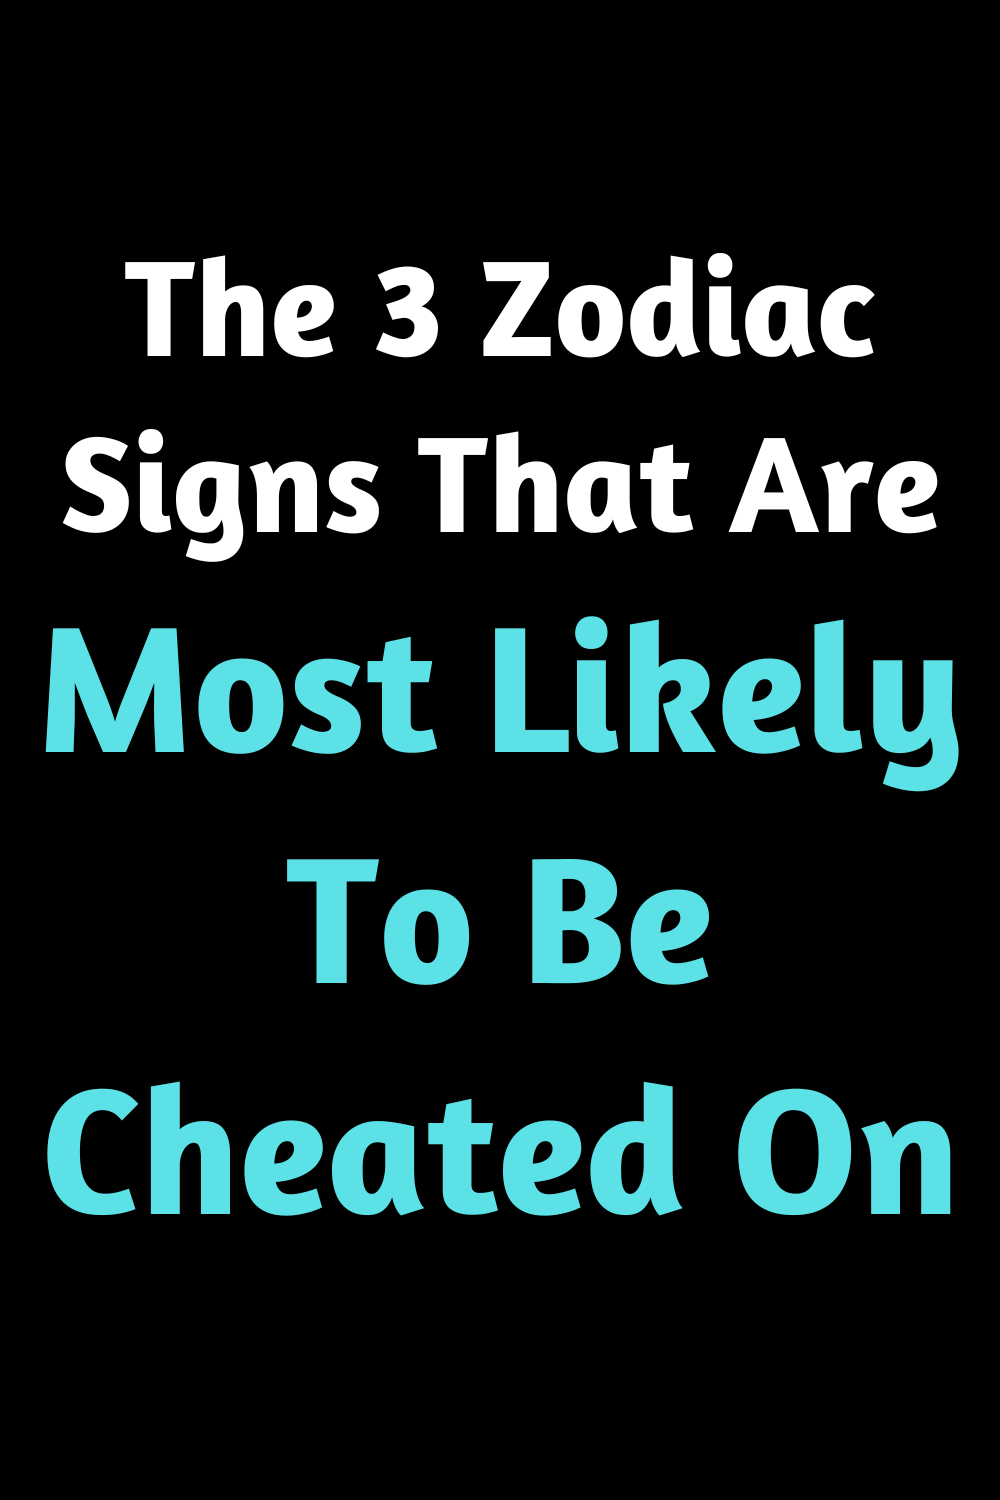 The 3 Zodiac Signs That Are Most Likely To Be Cheated On